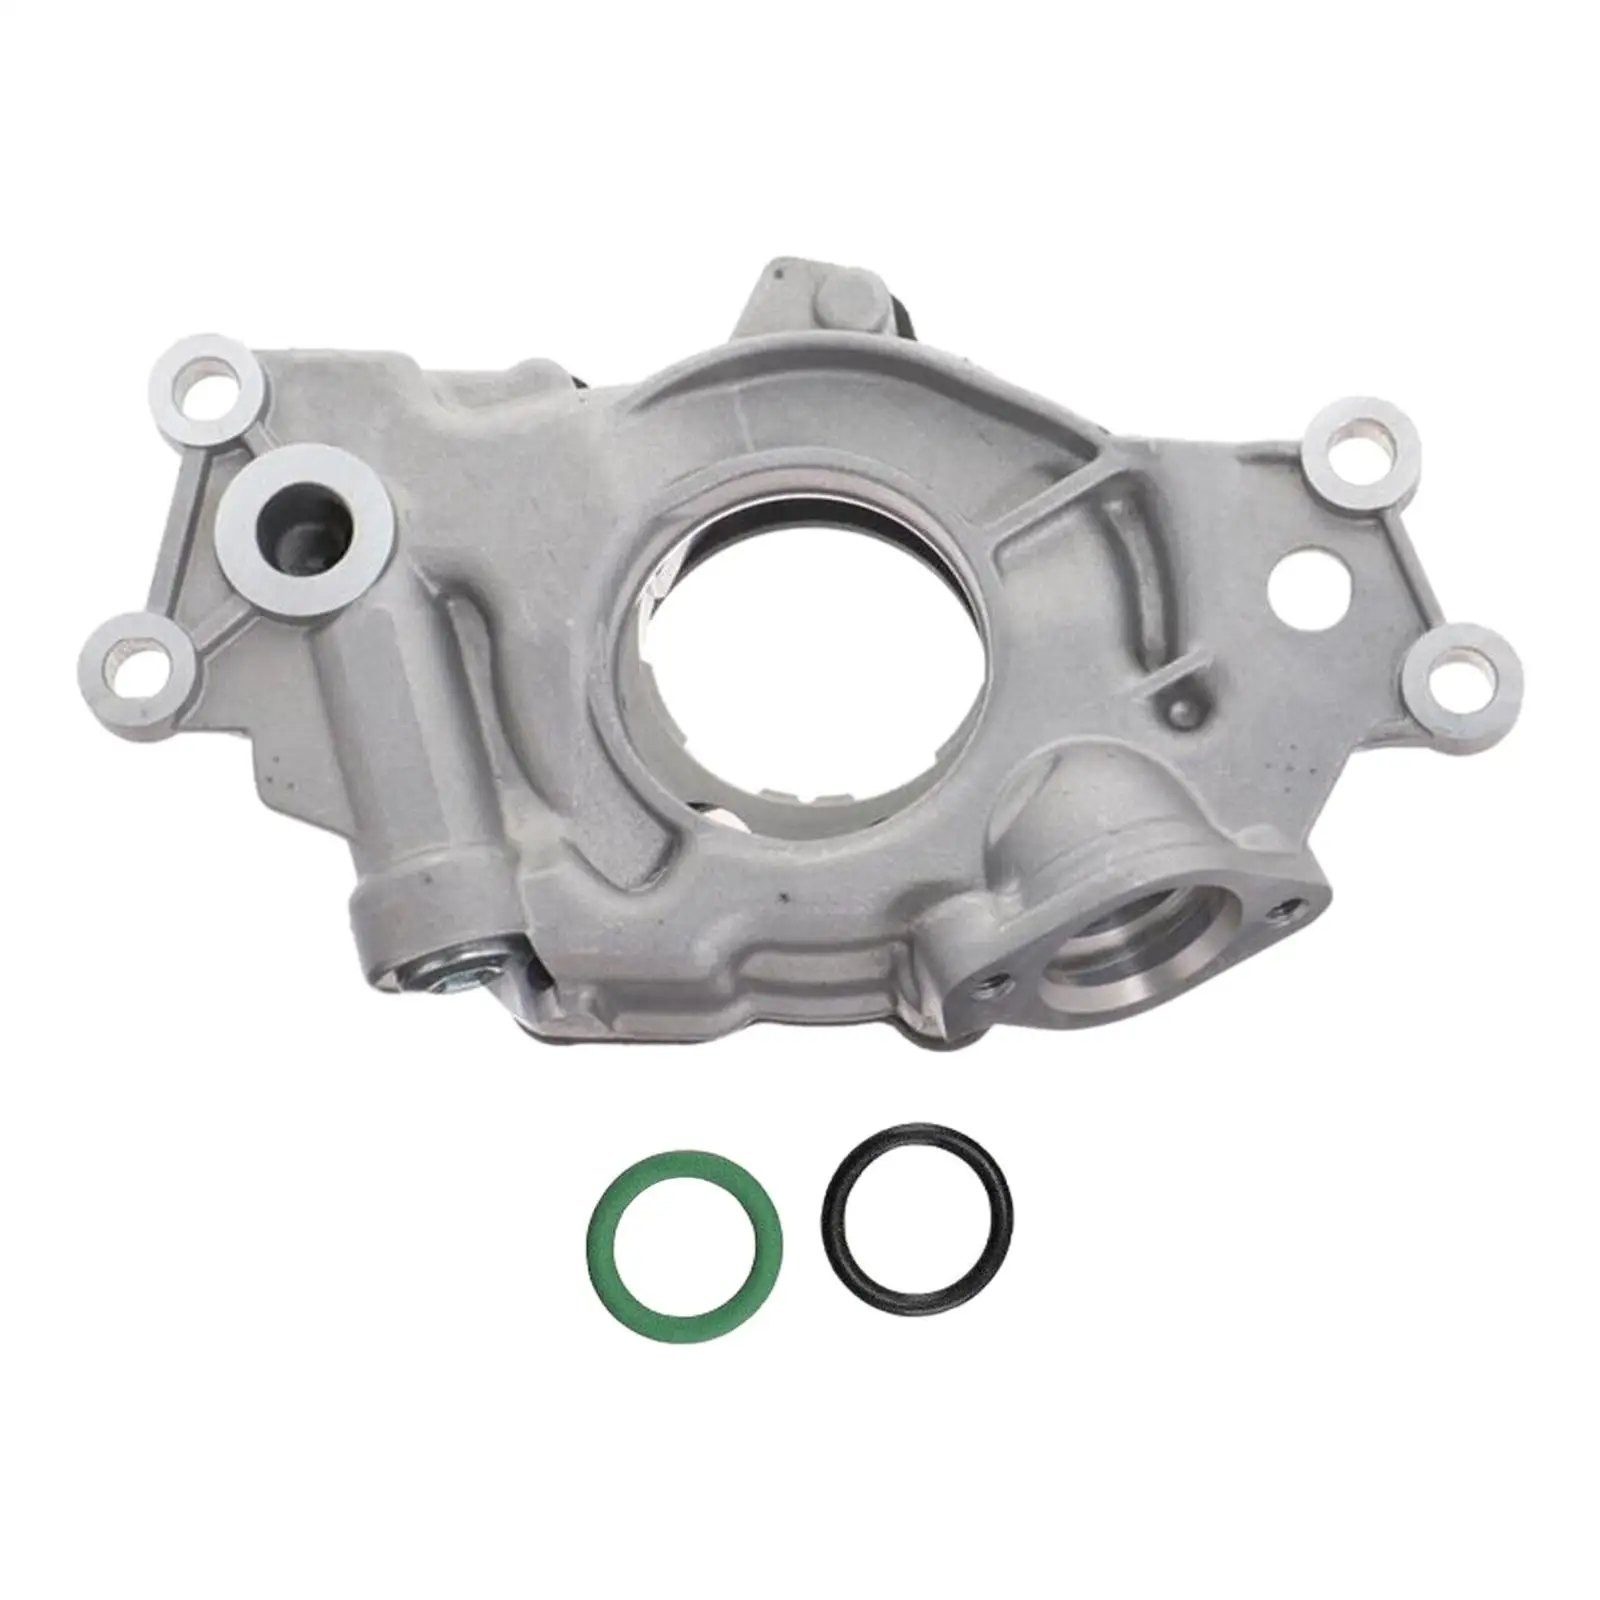 Engine Oil Pump Easy Installation Direct Replace Auto Accessories for Gen 4 Ls-based Engines 5.3L 6.0L 6.2L L76 LC9 Lmf LH9